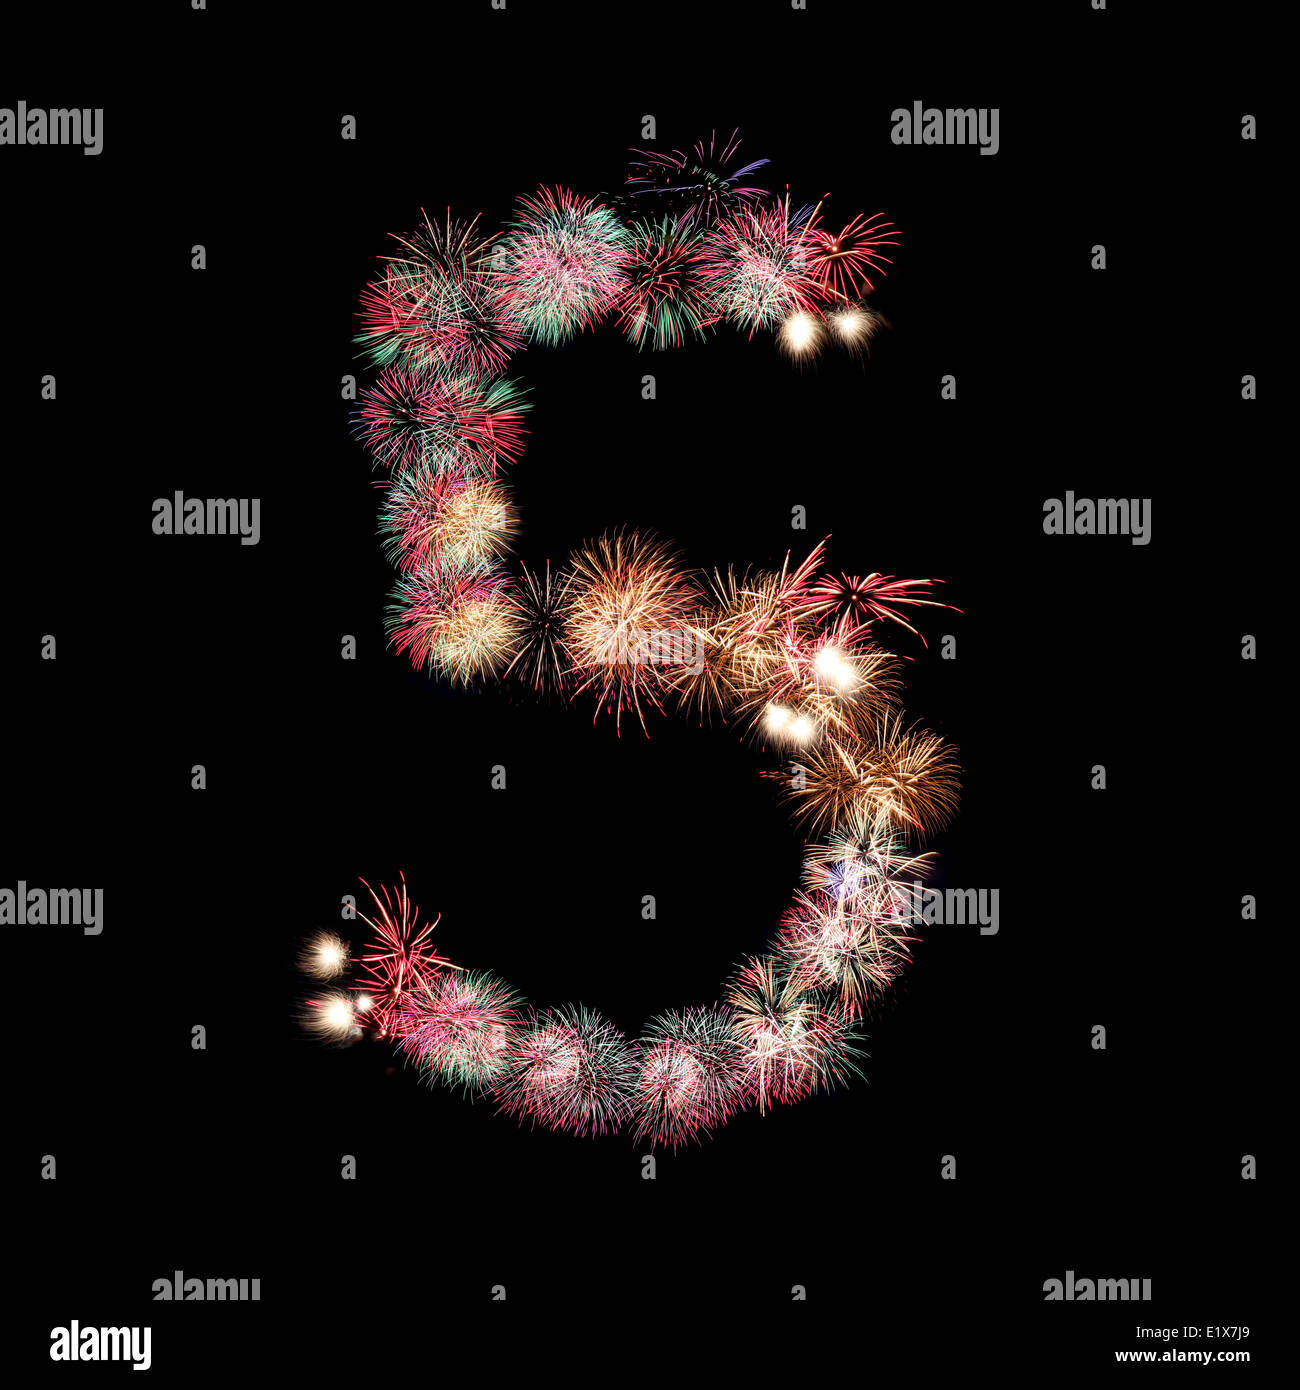 fireworks or firecracker of arrangement to be at number five. Stock Photo